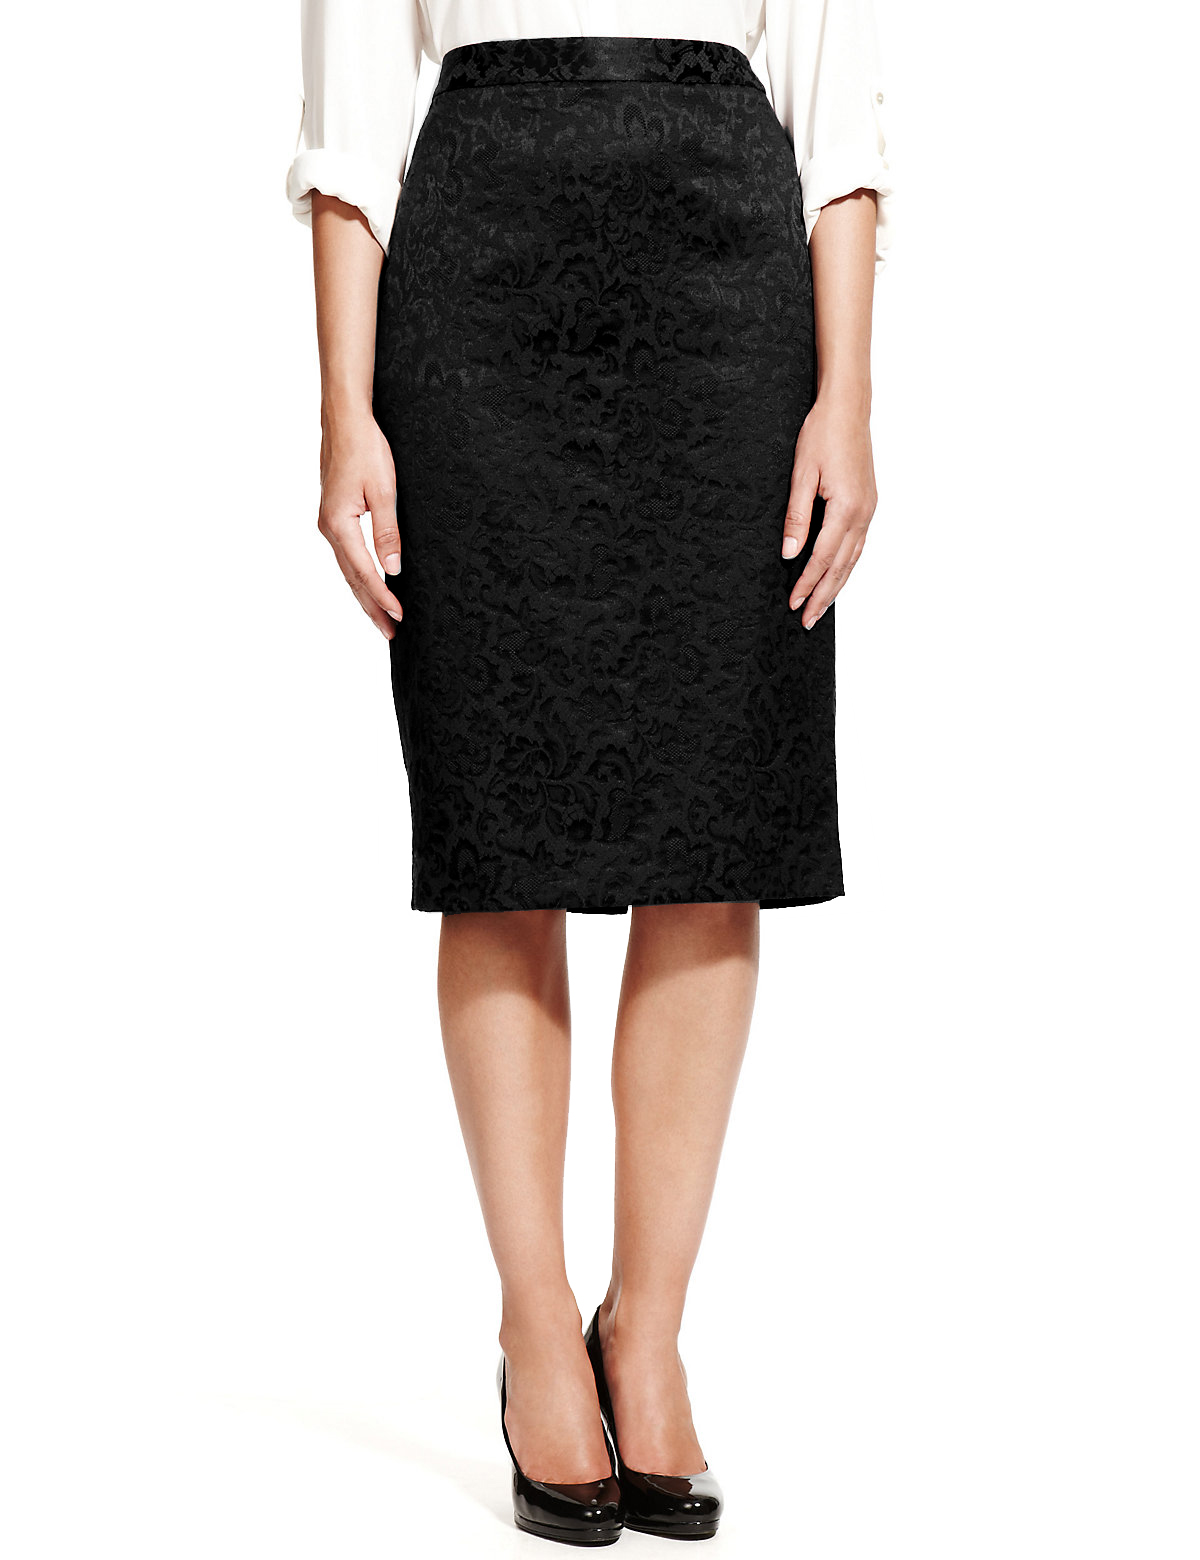 Marks and Spencer - - M&5 Black Jacquard Floral Lace Pencil Skirt ...